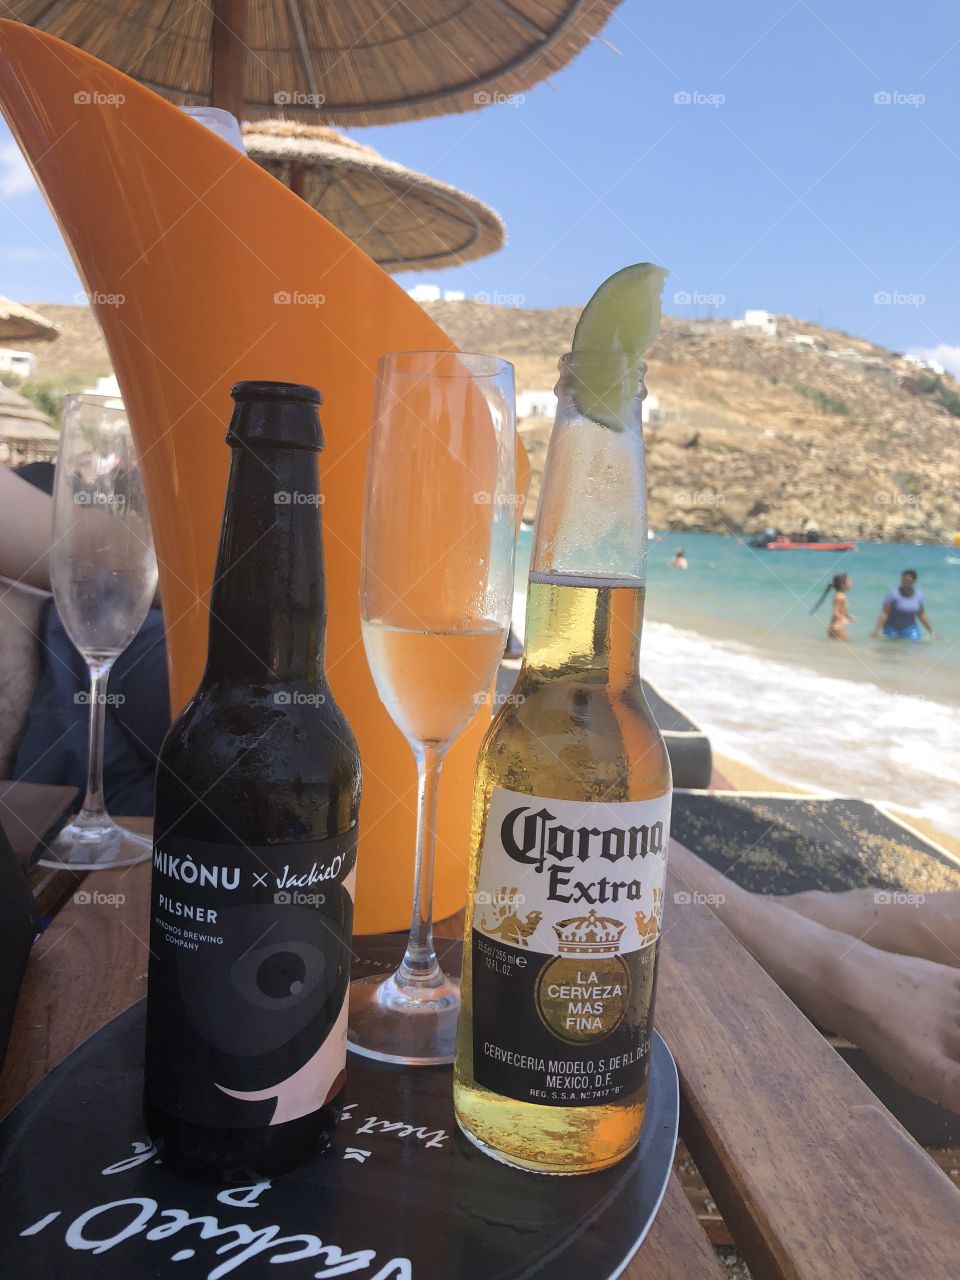 Beers and champagne served beachside or seaside in mykonos paradise beach jackie’ o